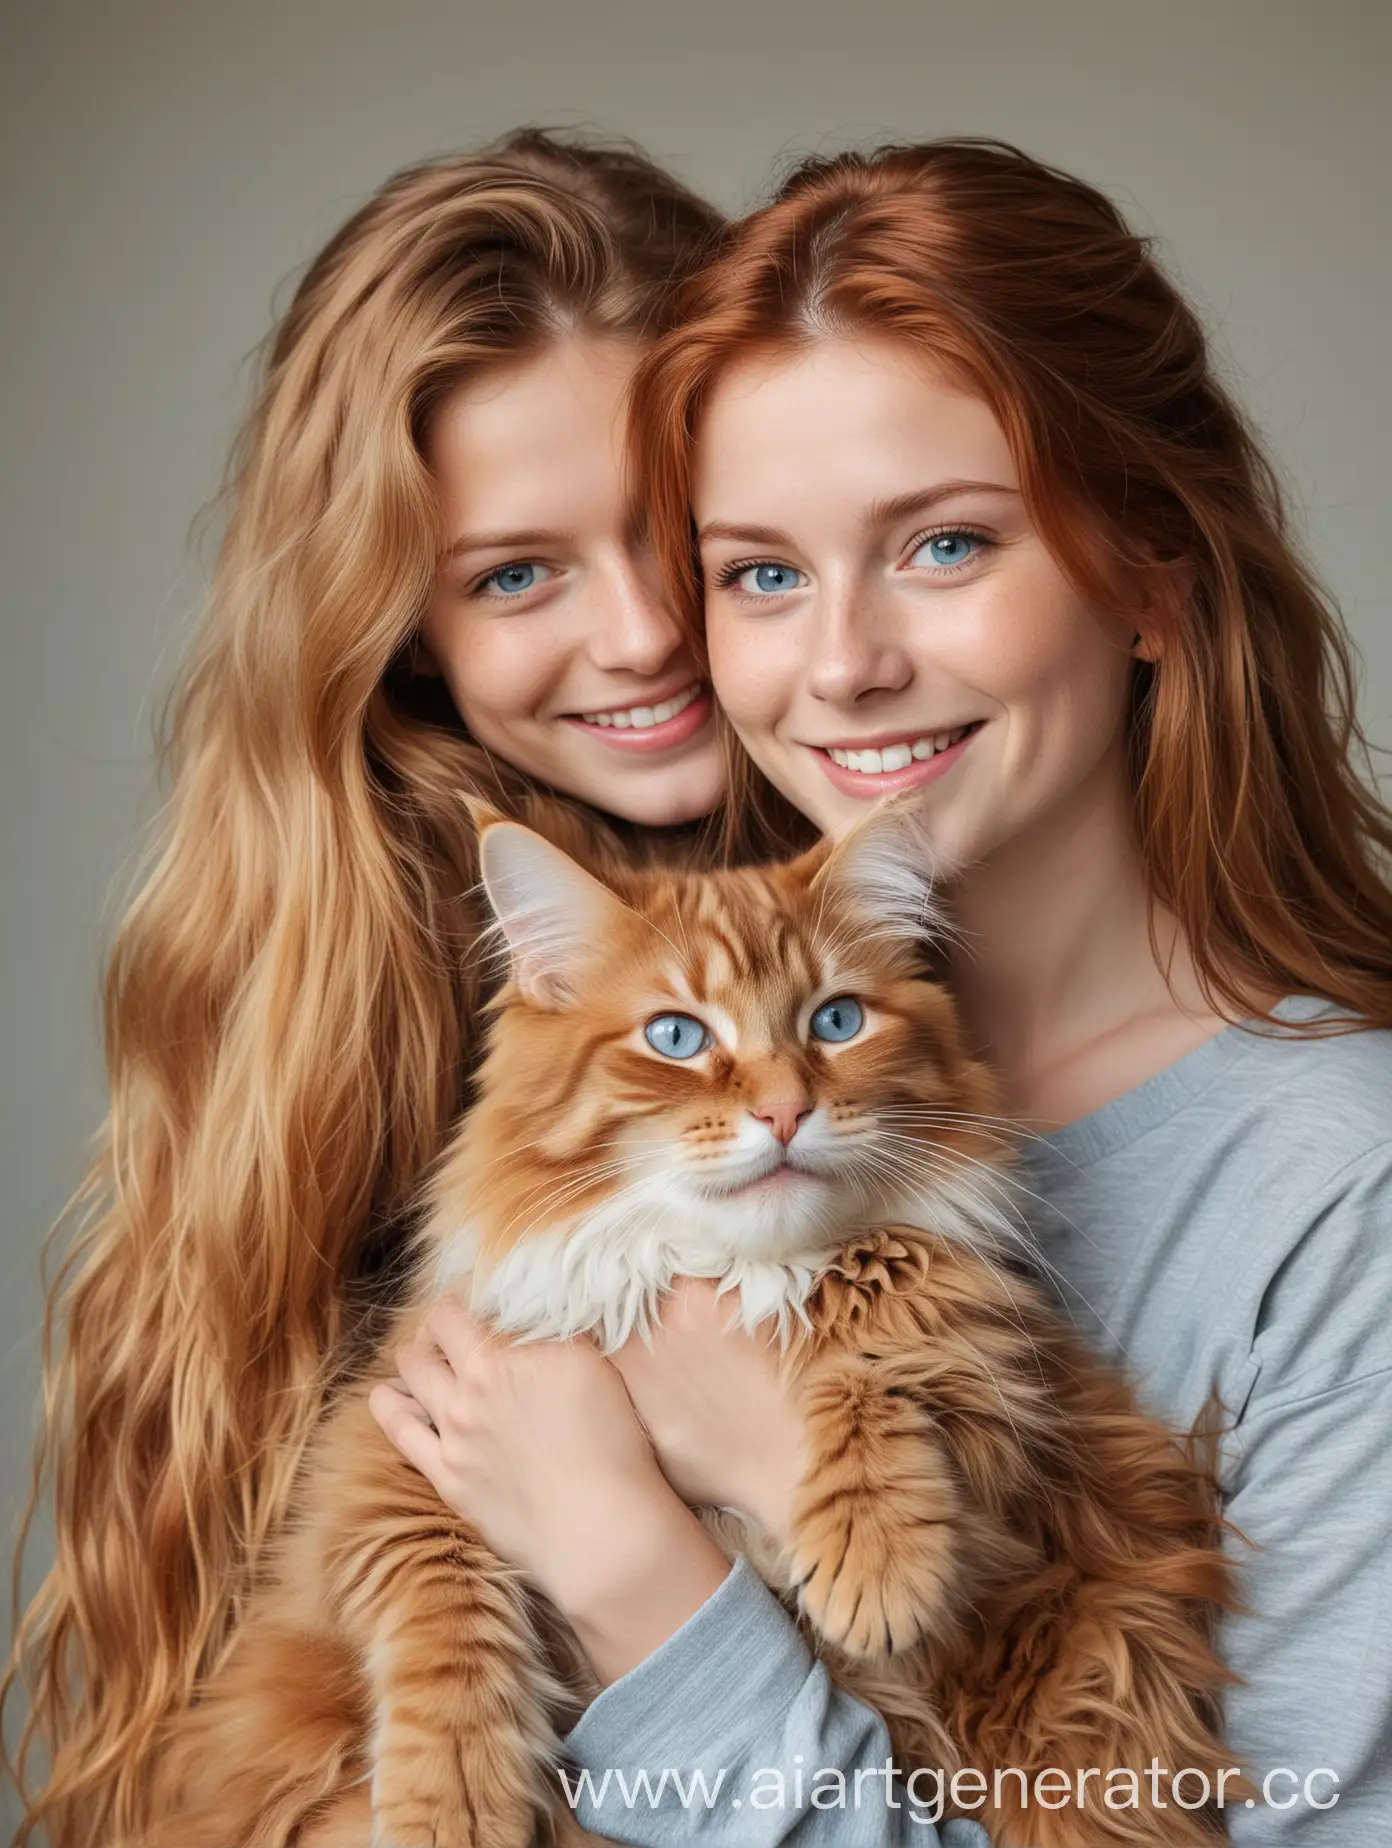 Smiling-Girl-with-Fair-Hair-Embracing-RedHaired-Boy-Holding-a-Maine-Coon-Cat